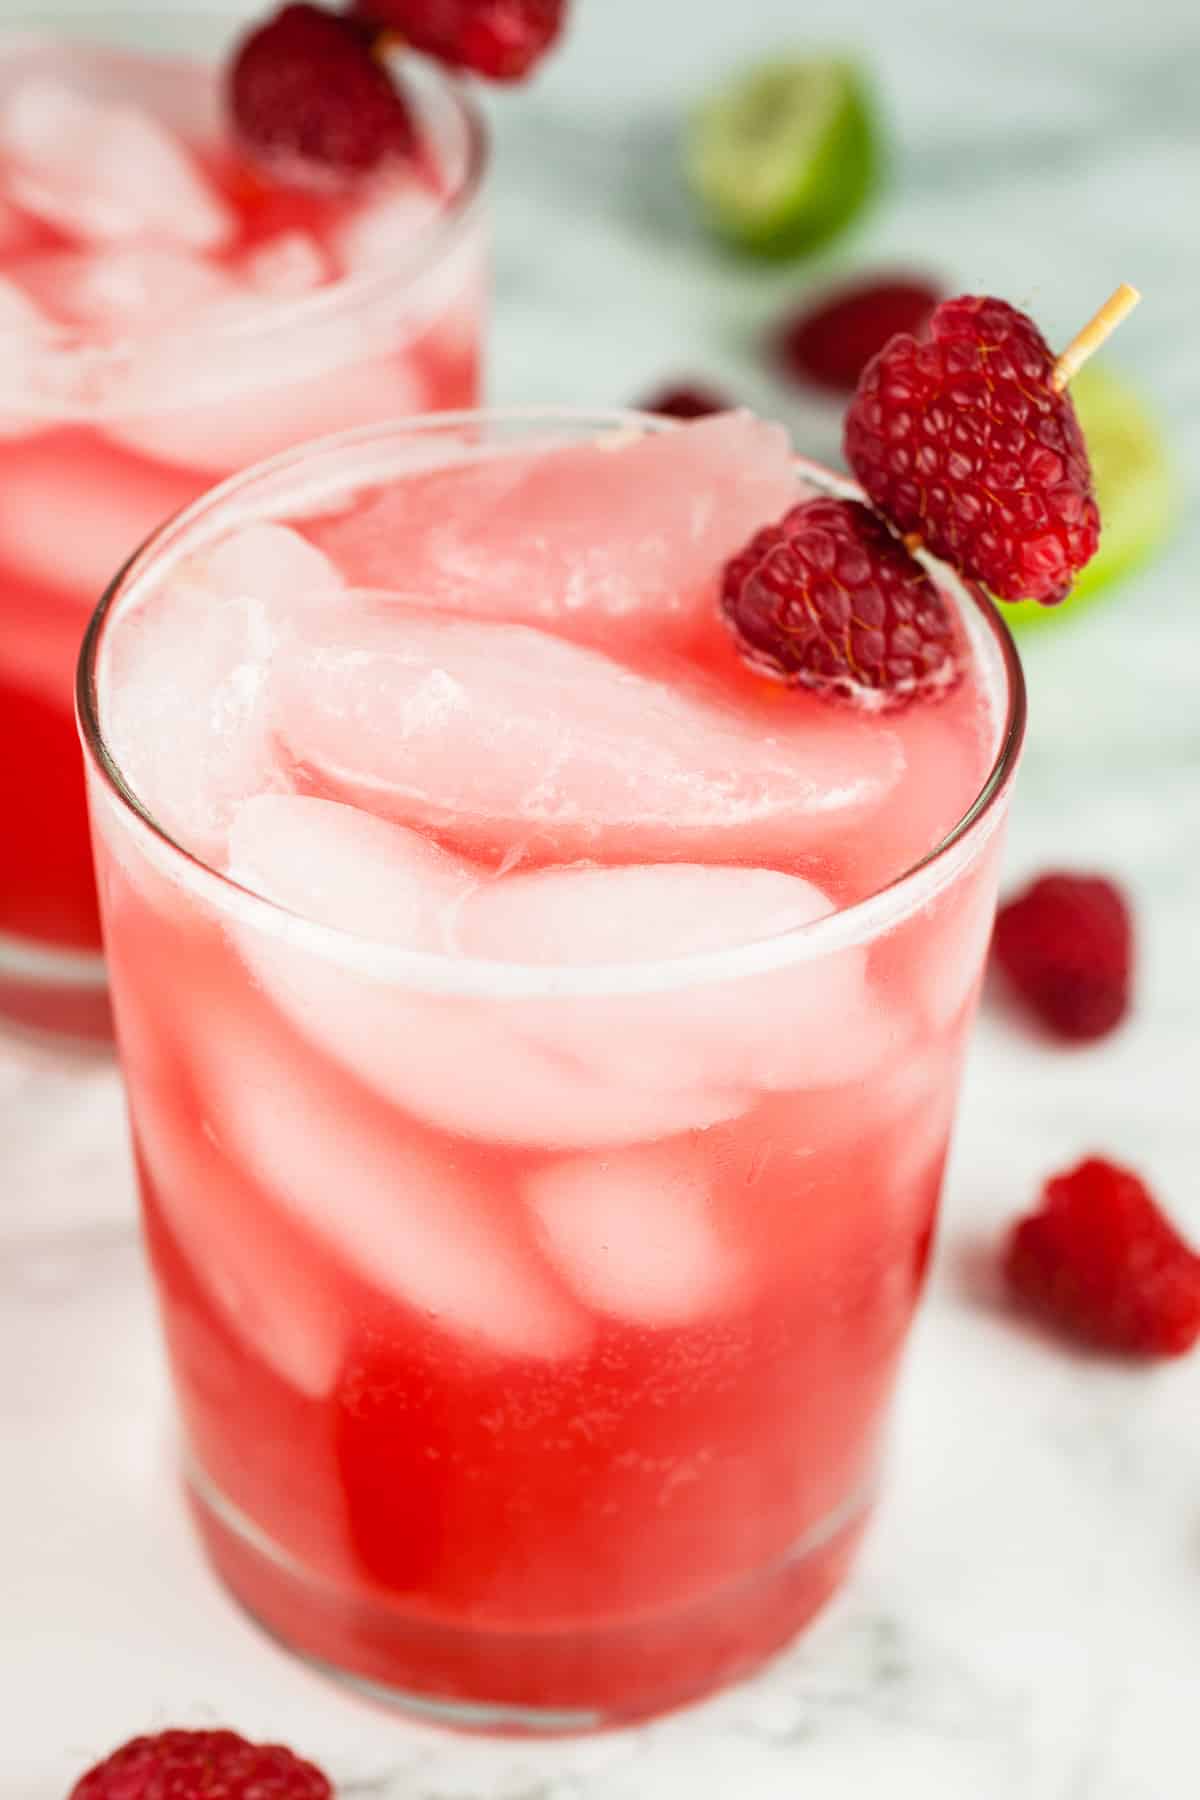 Raspberry mule cocktails in glasses garnished with fresh raspberries.